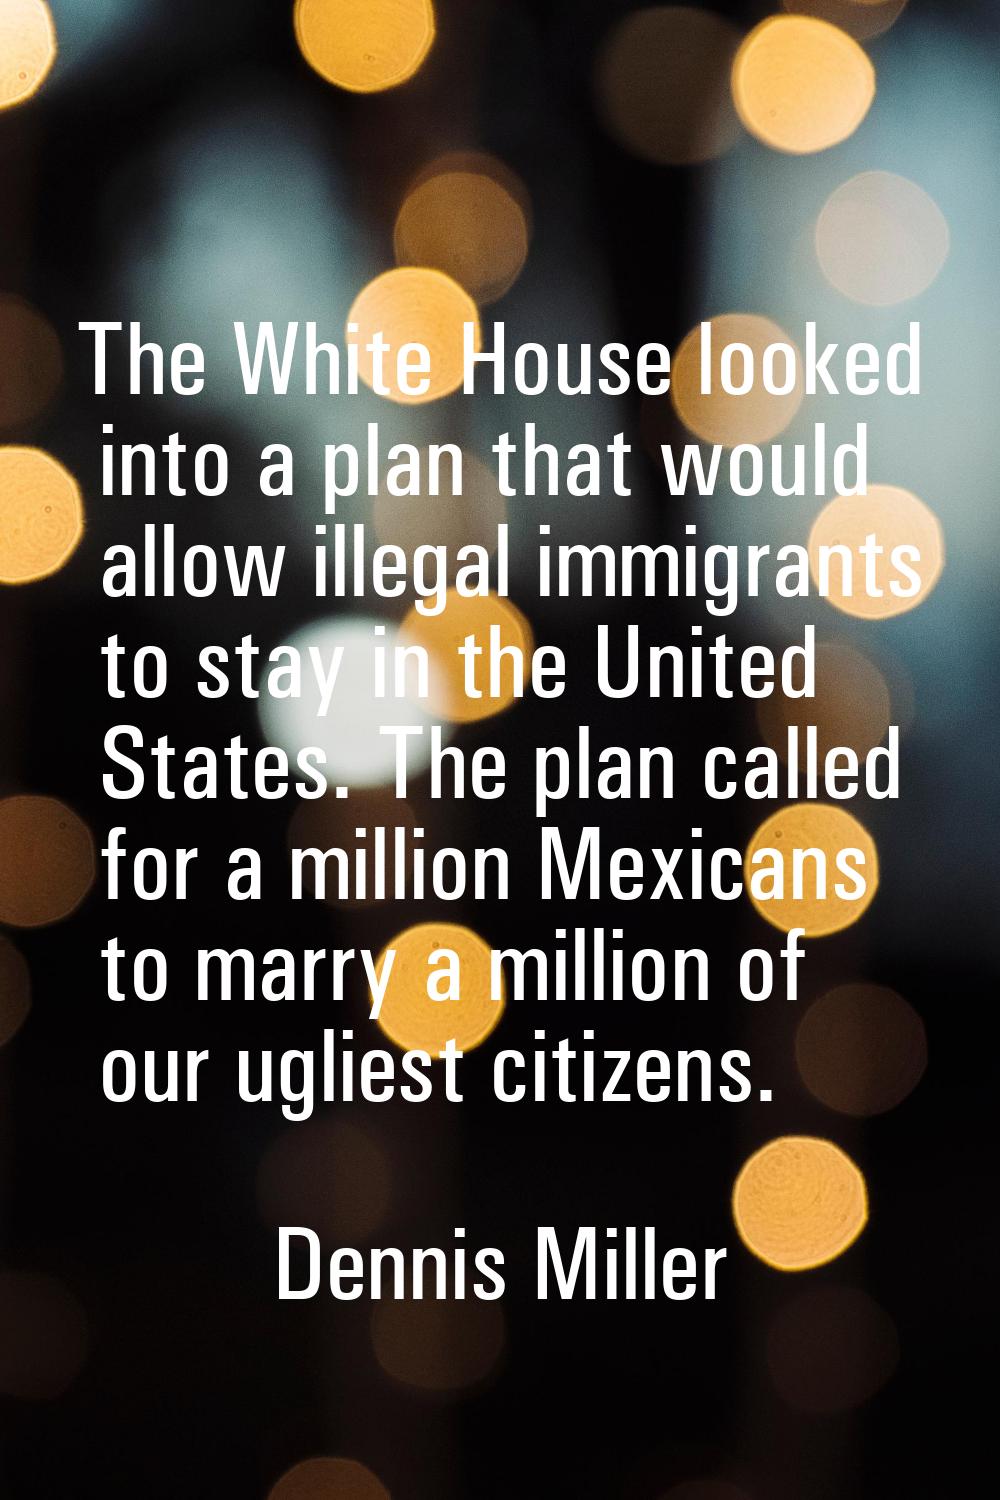 The White House looked into a plan that would allow illegal immigrants to stay in the United States